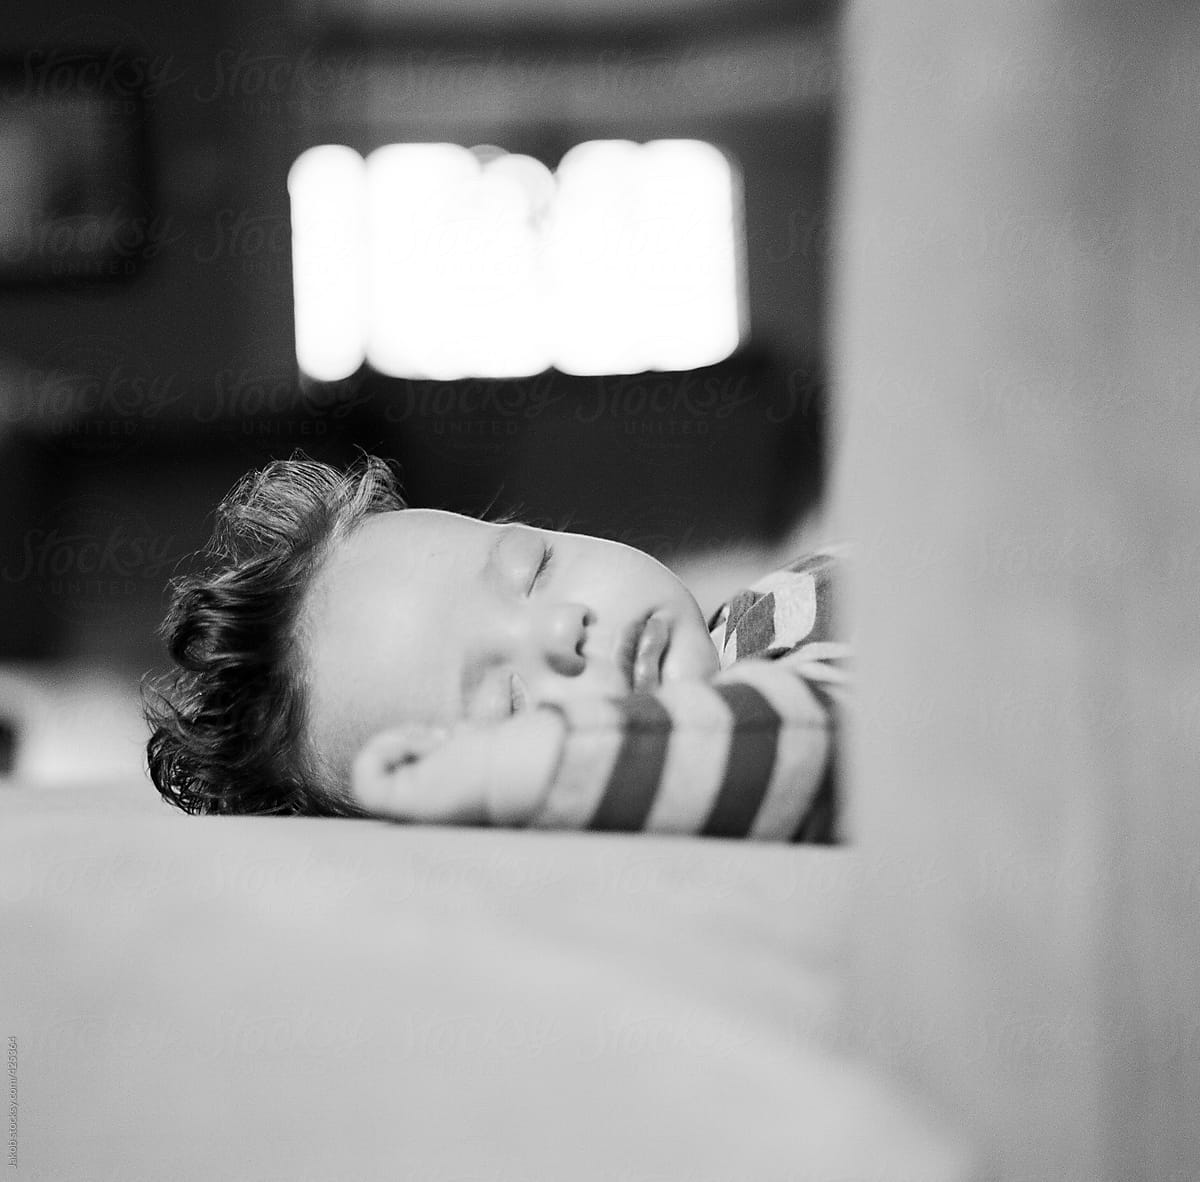 Infant boy sleeping on couch